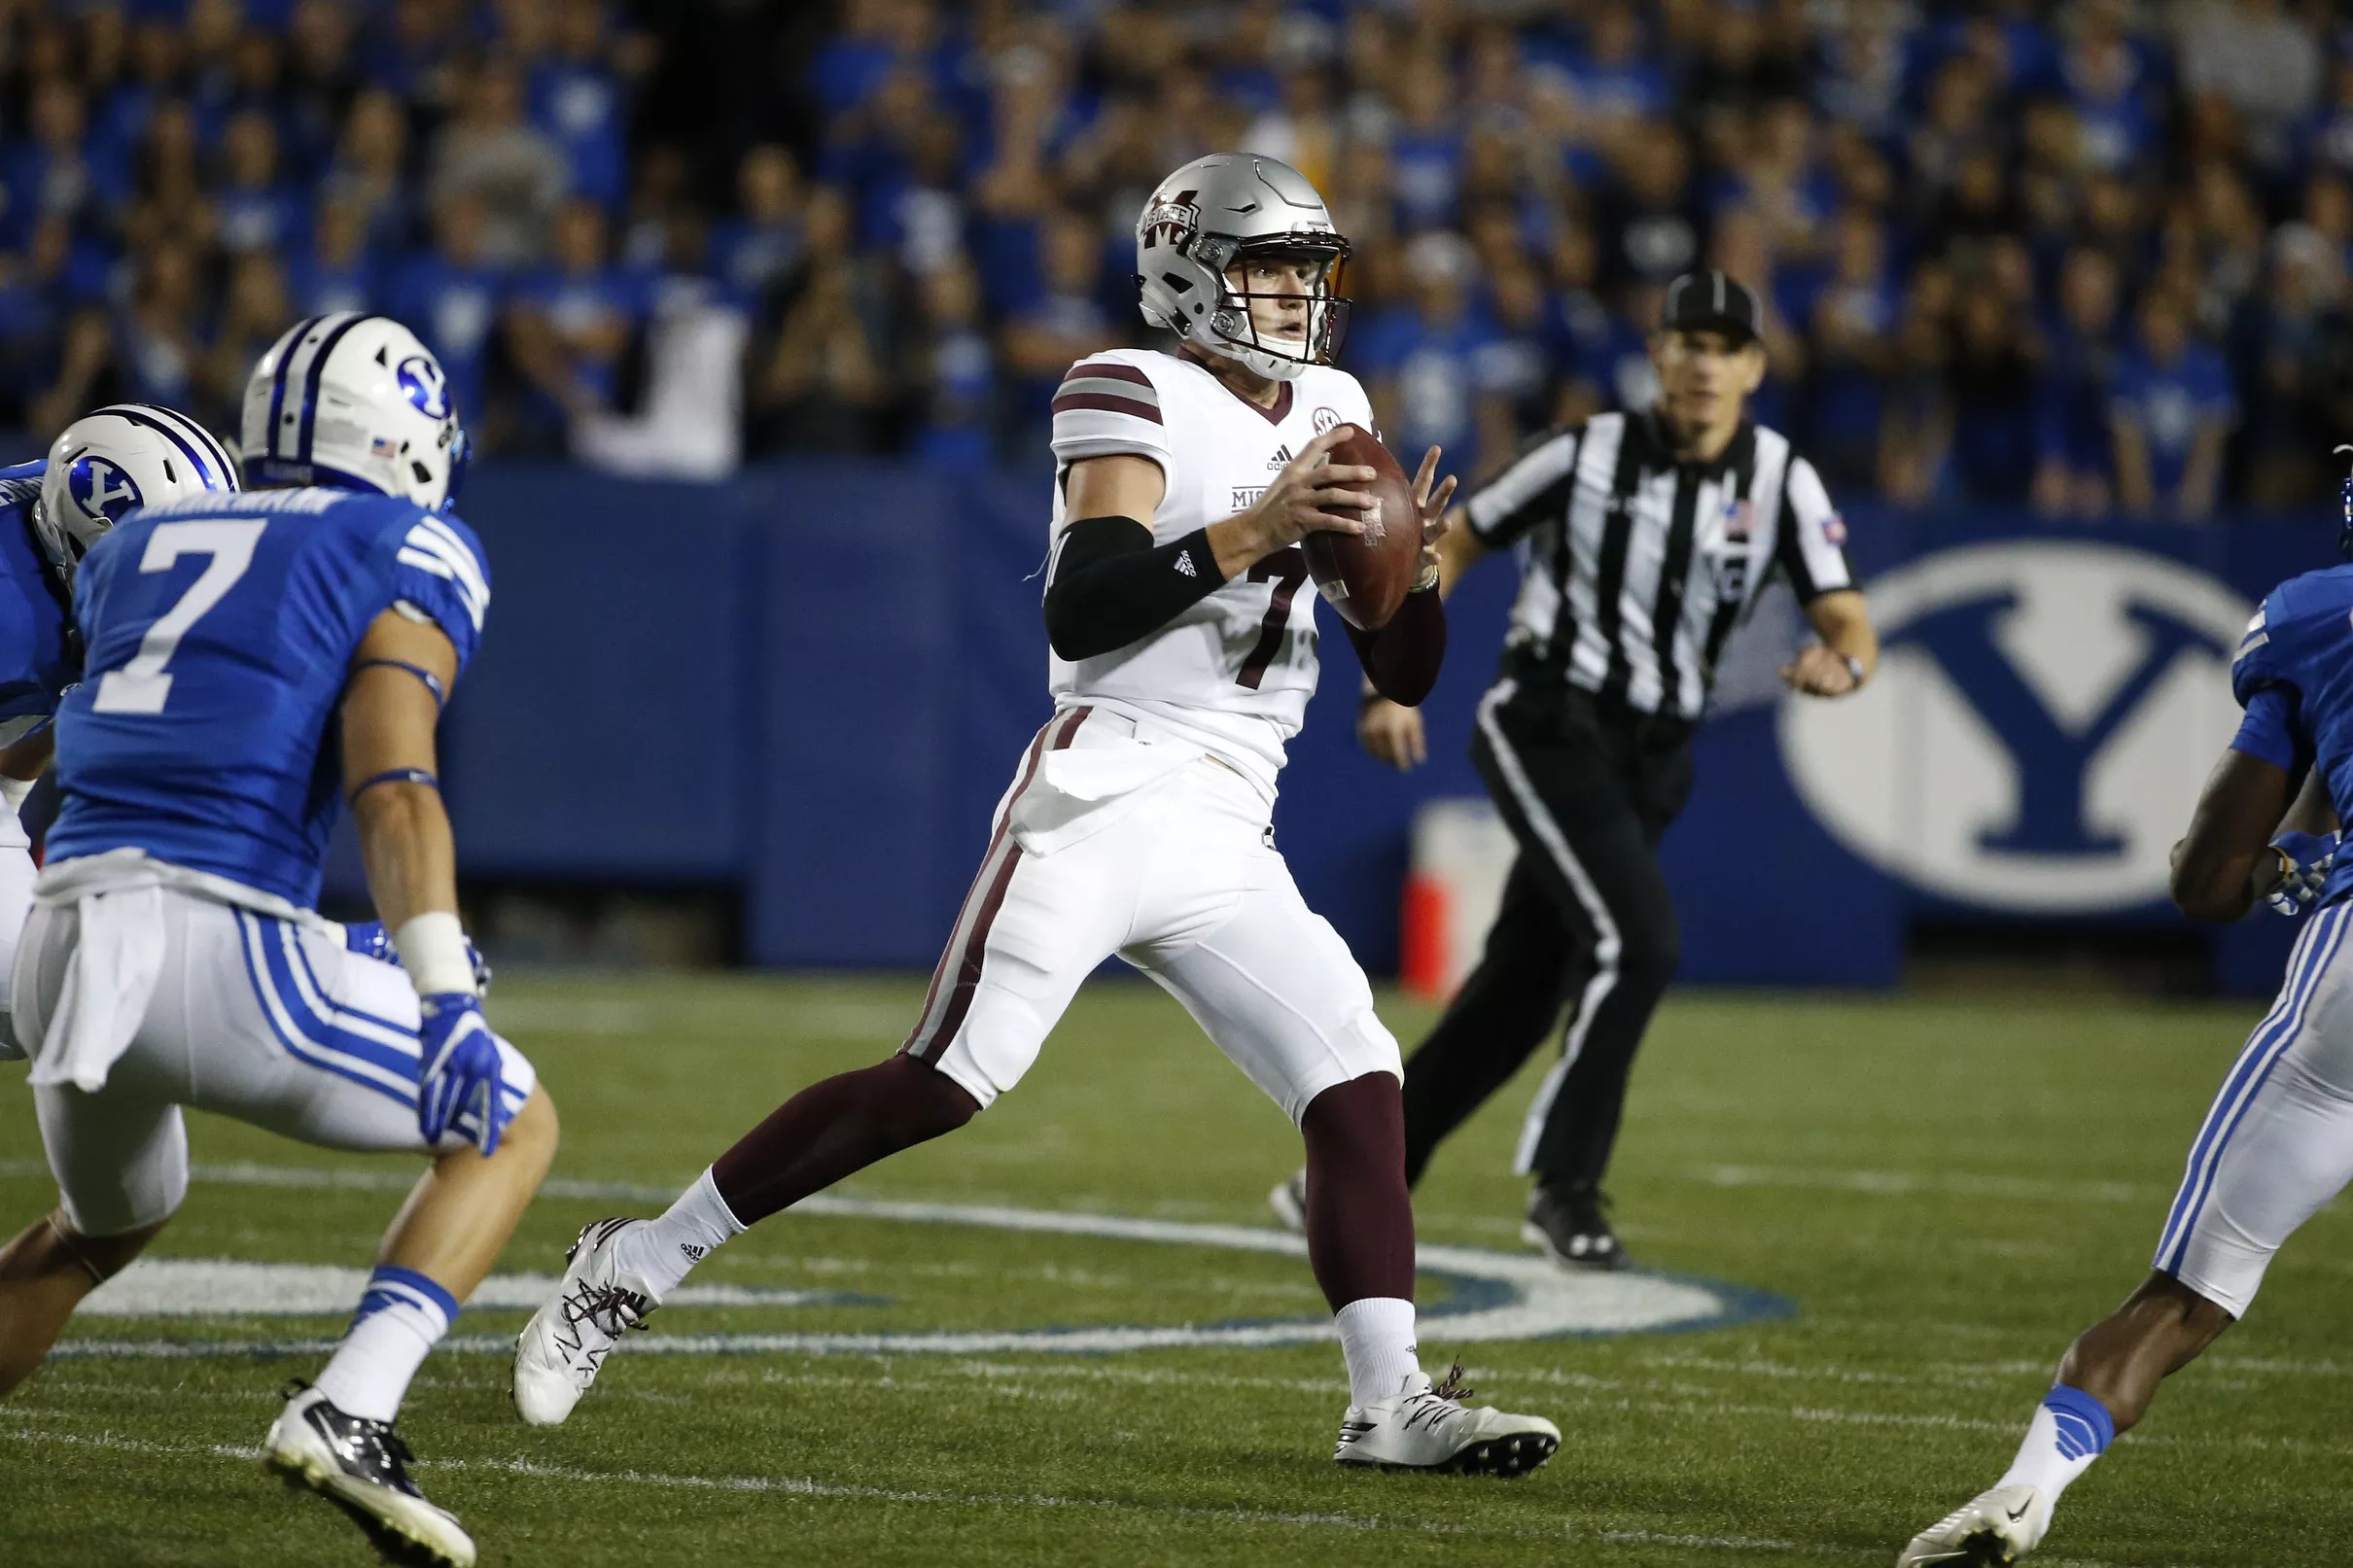 Mississippi State Versus BYU Start Time and Broadcast Info Announced